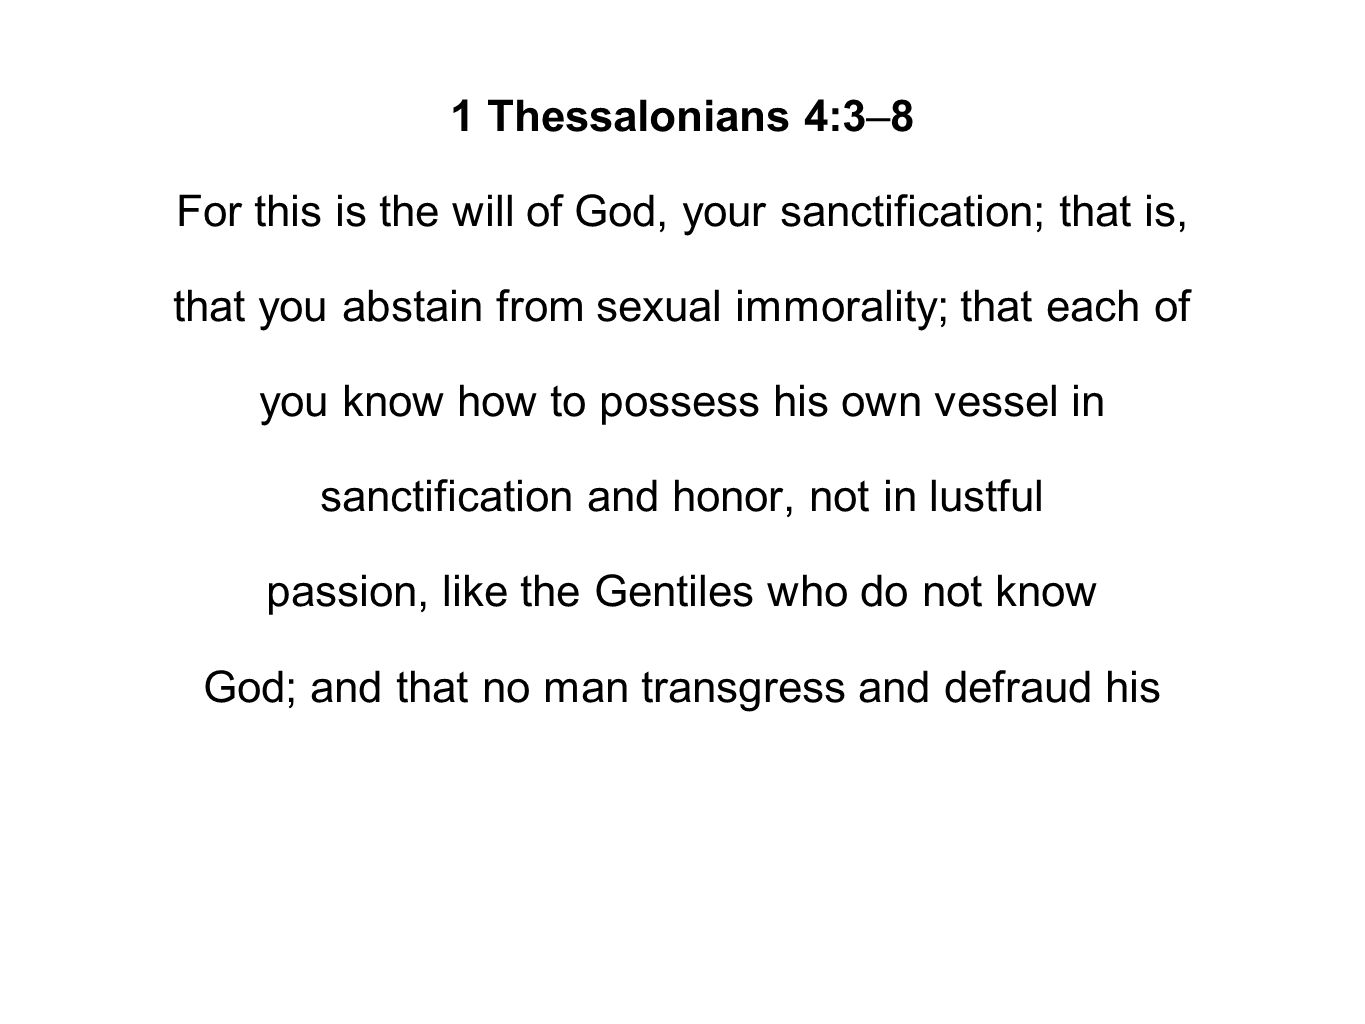 1 Thessalonians 4:3–8 For this is the will of God, your sanctification; that is, that you abstain from sexual immorality; that each of you know how to possess his own vessel in sanctification and honor, not in lustful passion, like the Gentiles who do not know God; and that no man transgress and defraud his